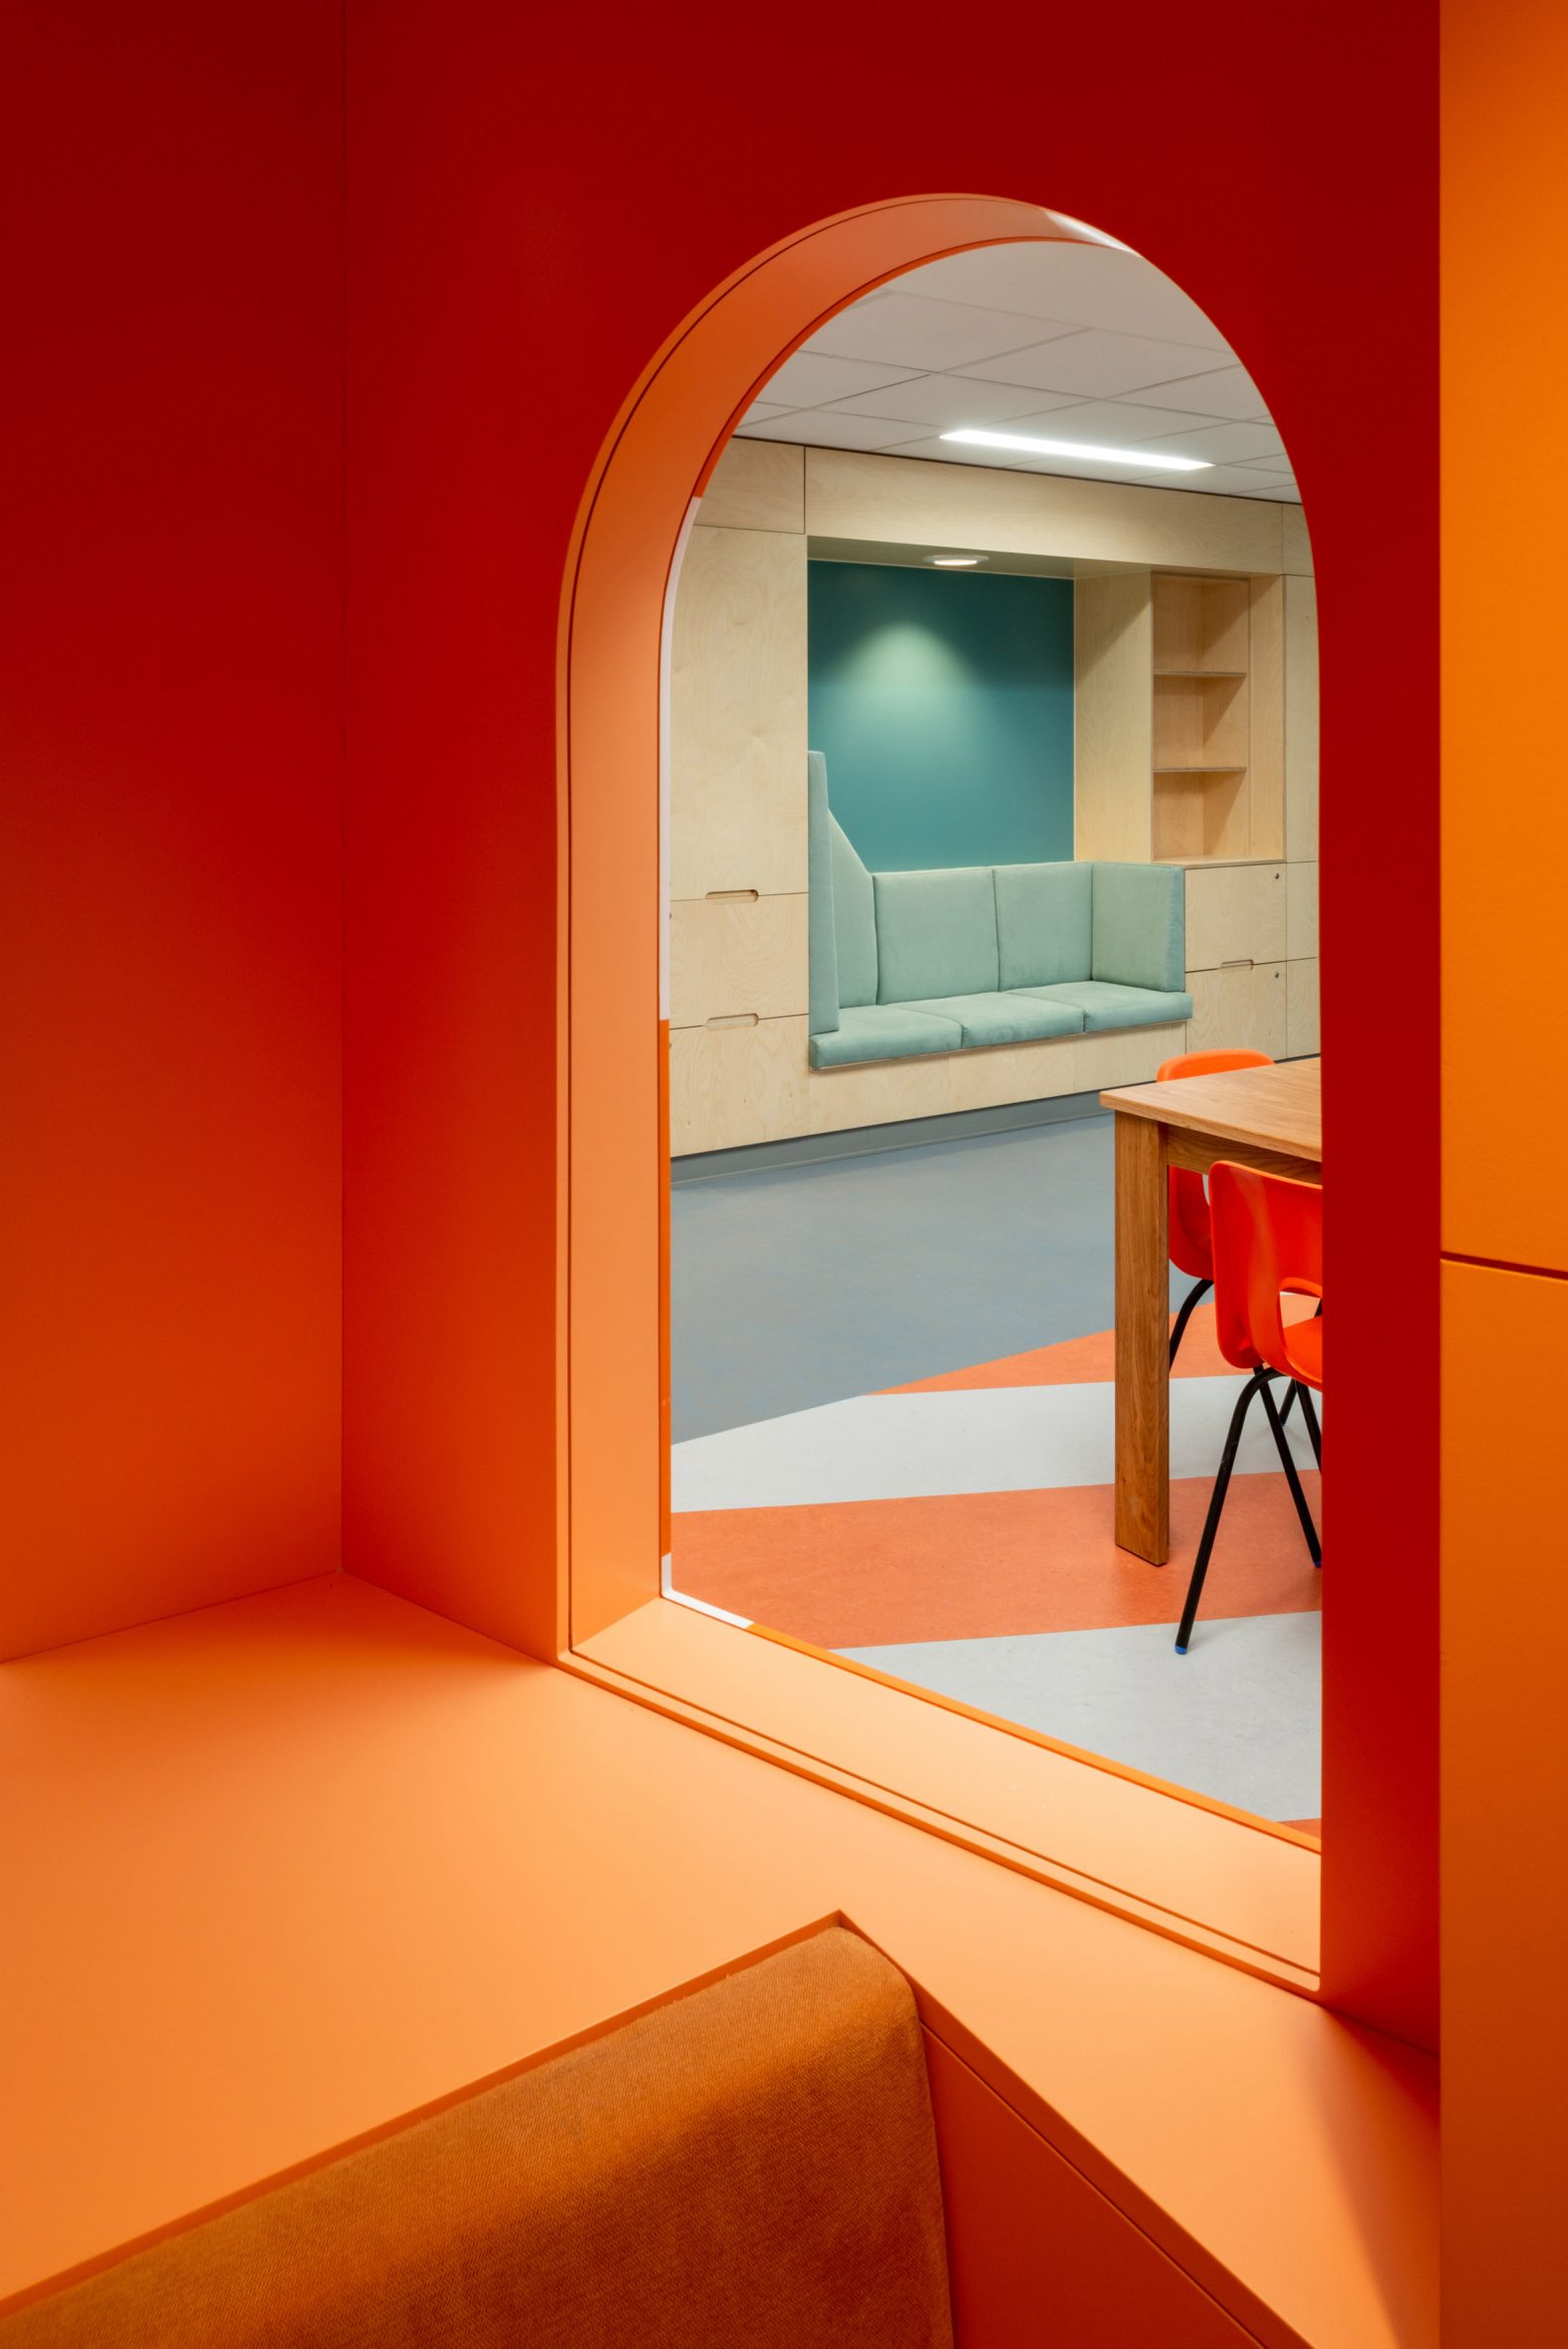 Projects Office designs interior for mental health facility in Edinburgh